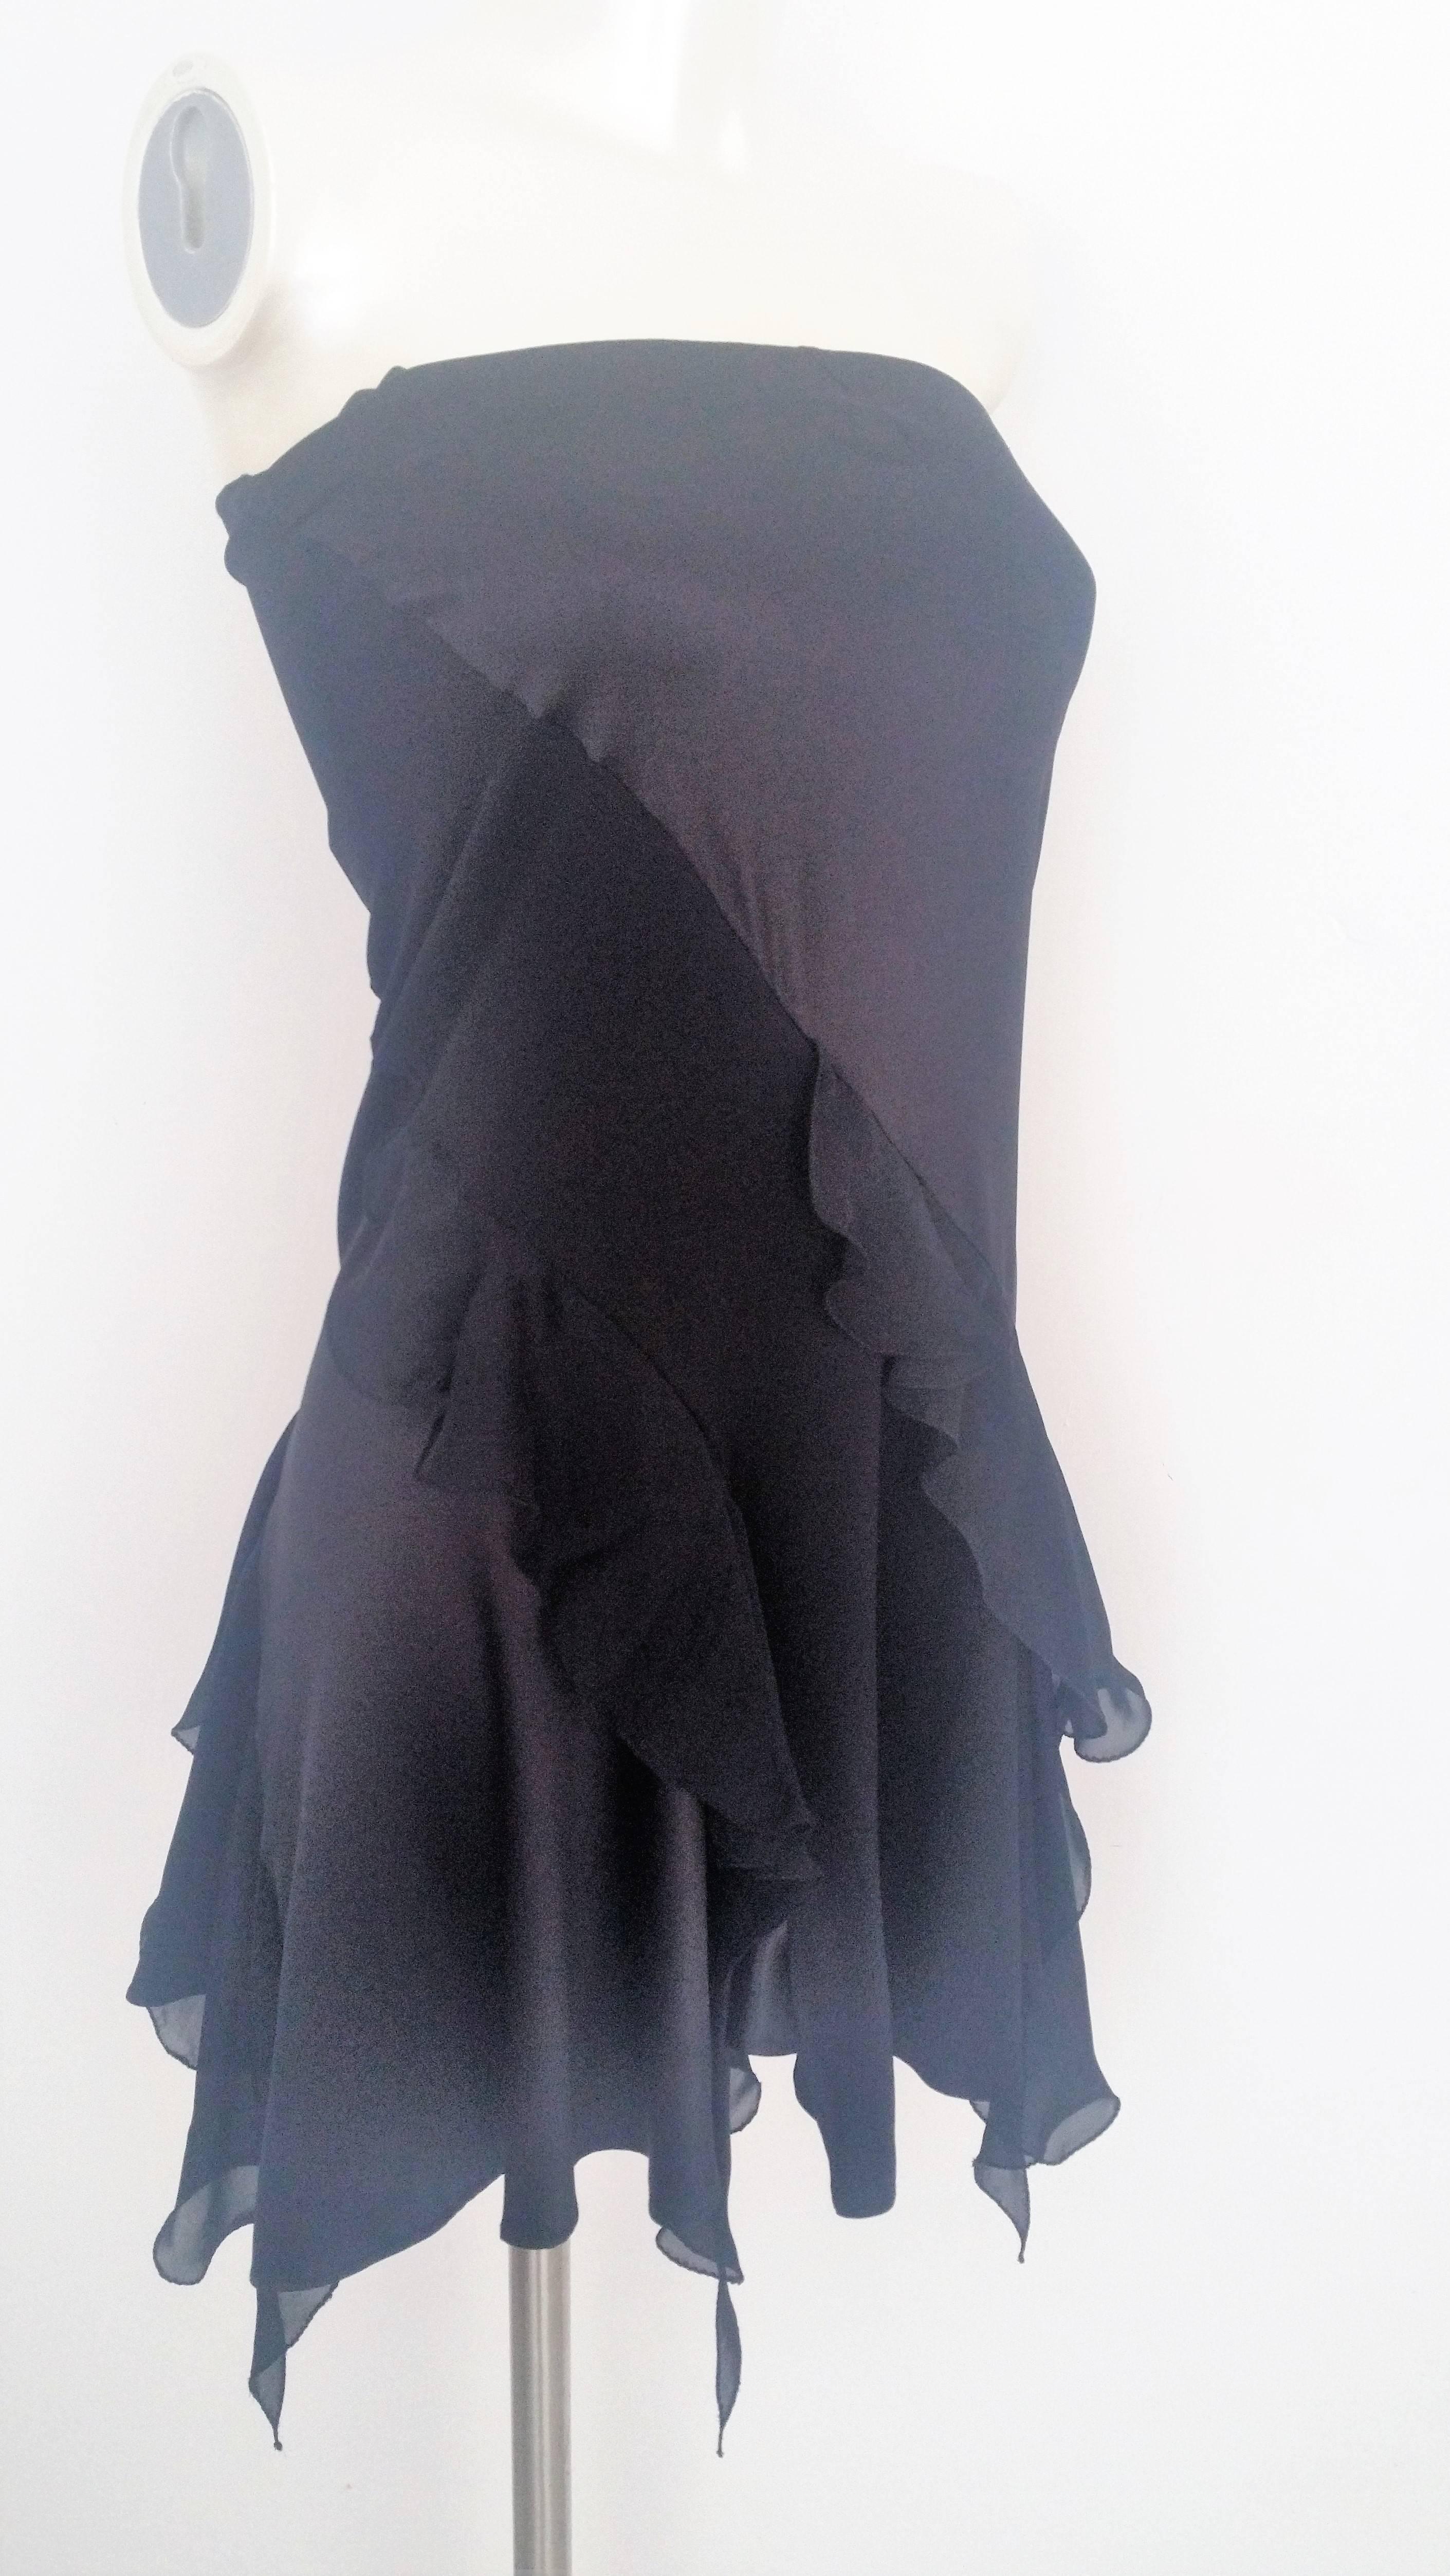 1990s Roberto Cavalli black dress NWOT
It can be worn as a skirt or as a mini dress still with tags
retail price 1200 € 